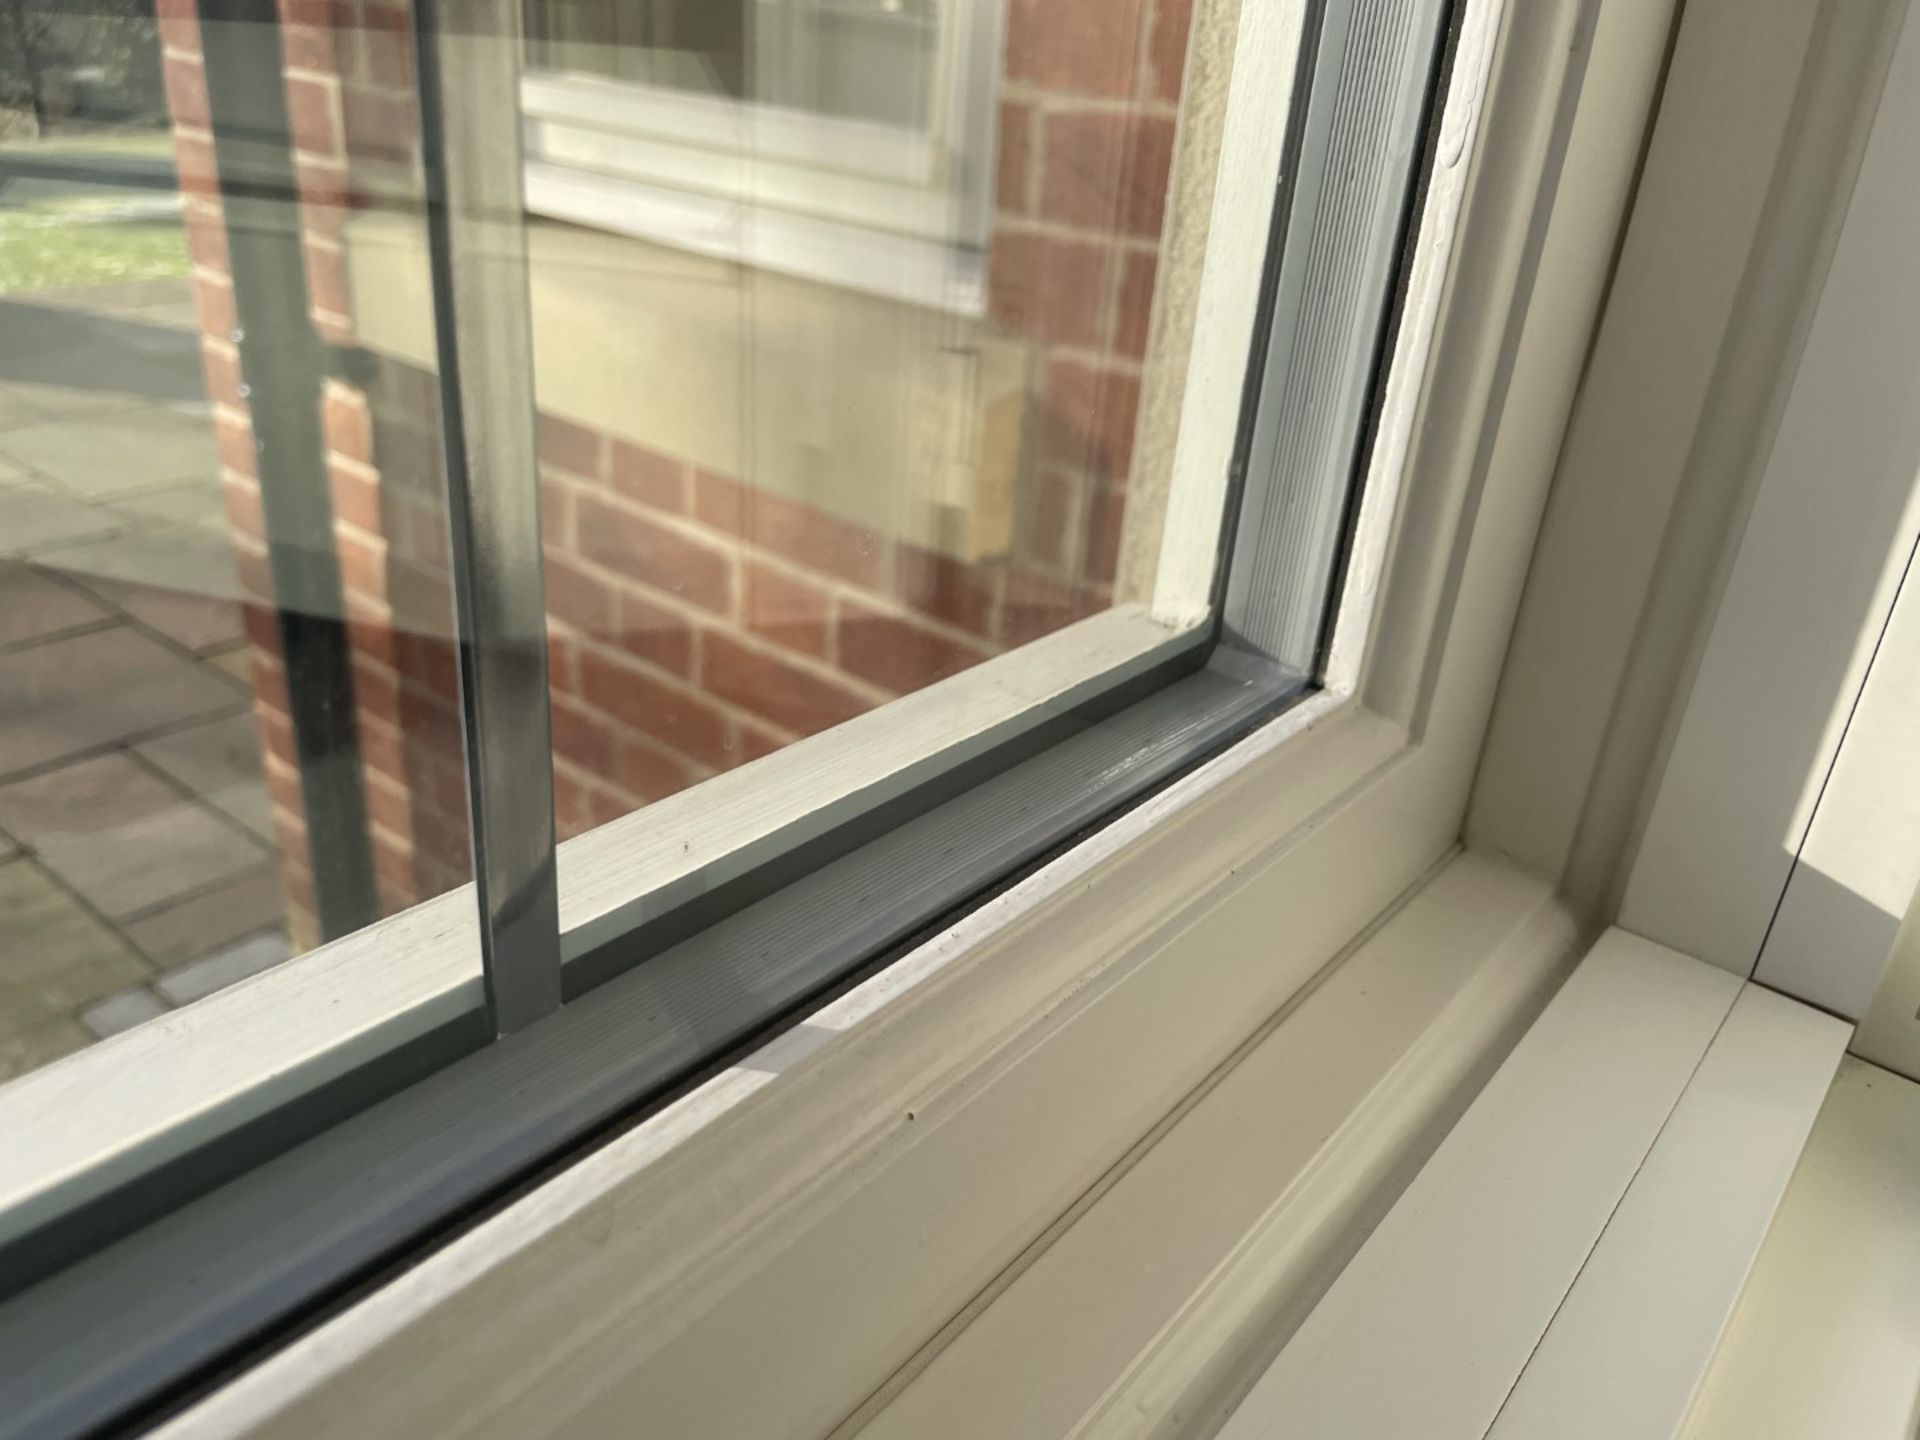 1 x Hardwood Timber Double Glazed Window Frames fitted with Shutter Blinds, In White - Ref: PAN105 - Image 10 of 11